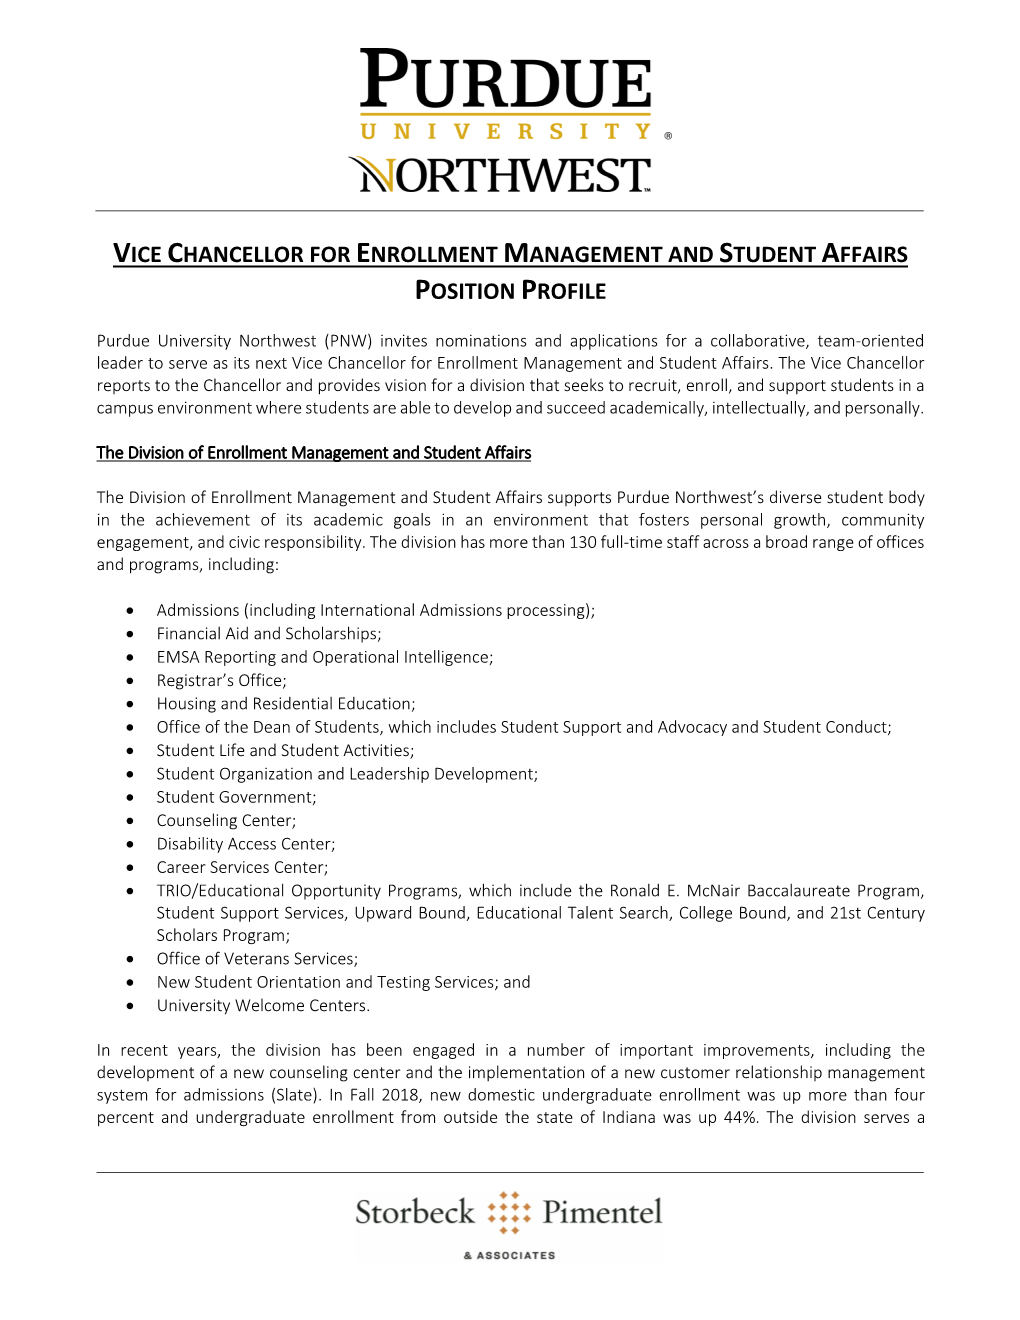 Vice Chancellor for Enrollment Management and Student Affairs Position Profile